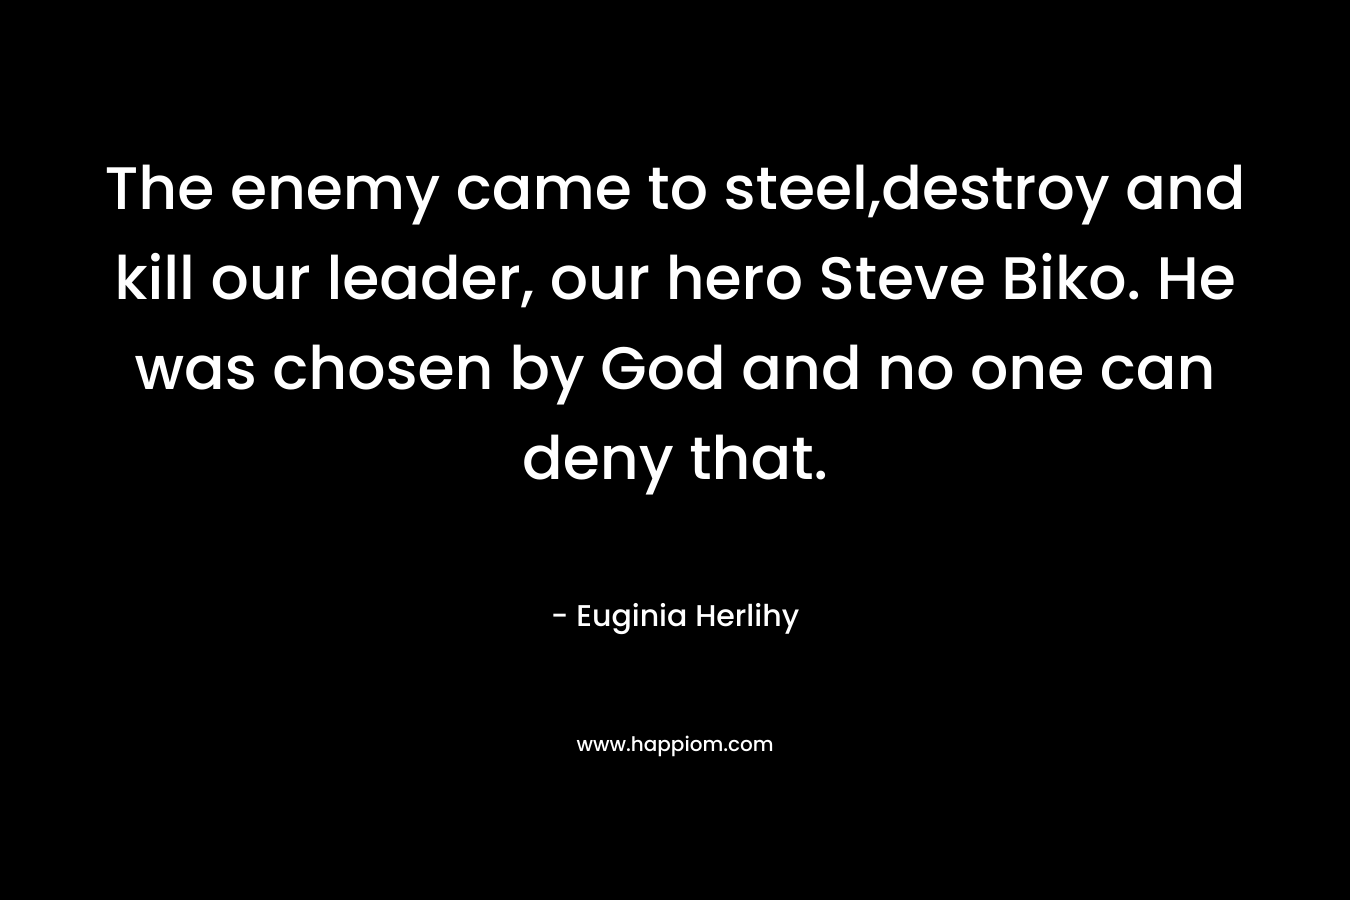 The enemy came to steel,destroy and kill our leader, our hero Steve Biko. He was chosen by God and no one can deny that.